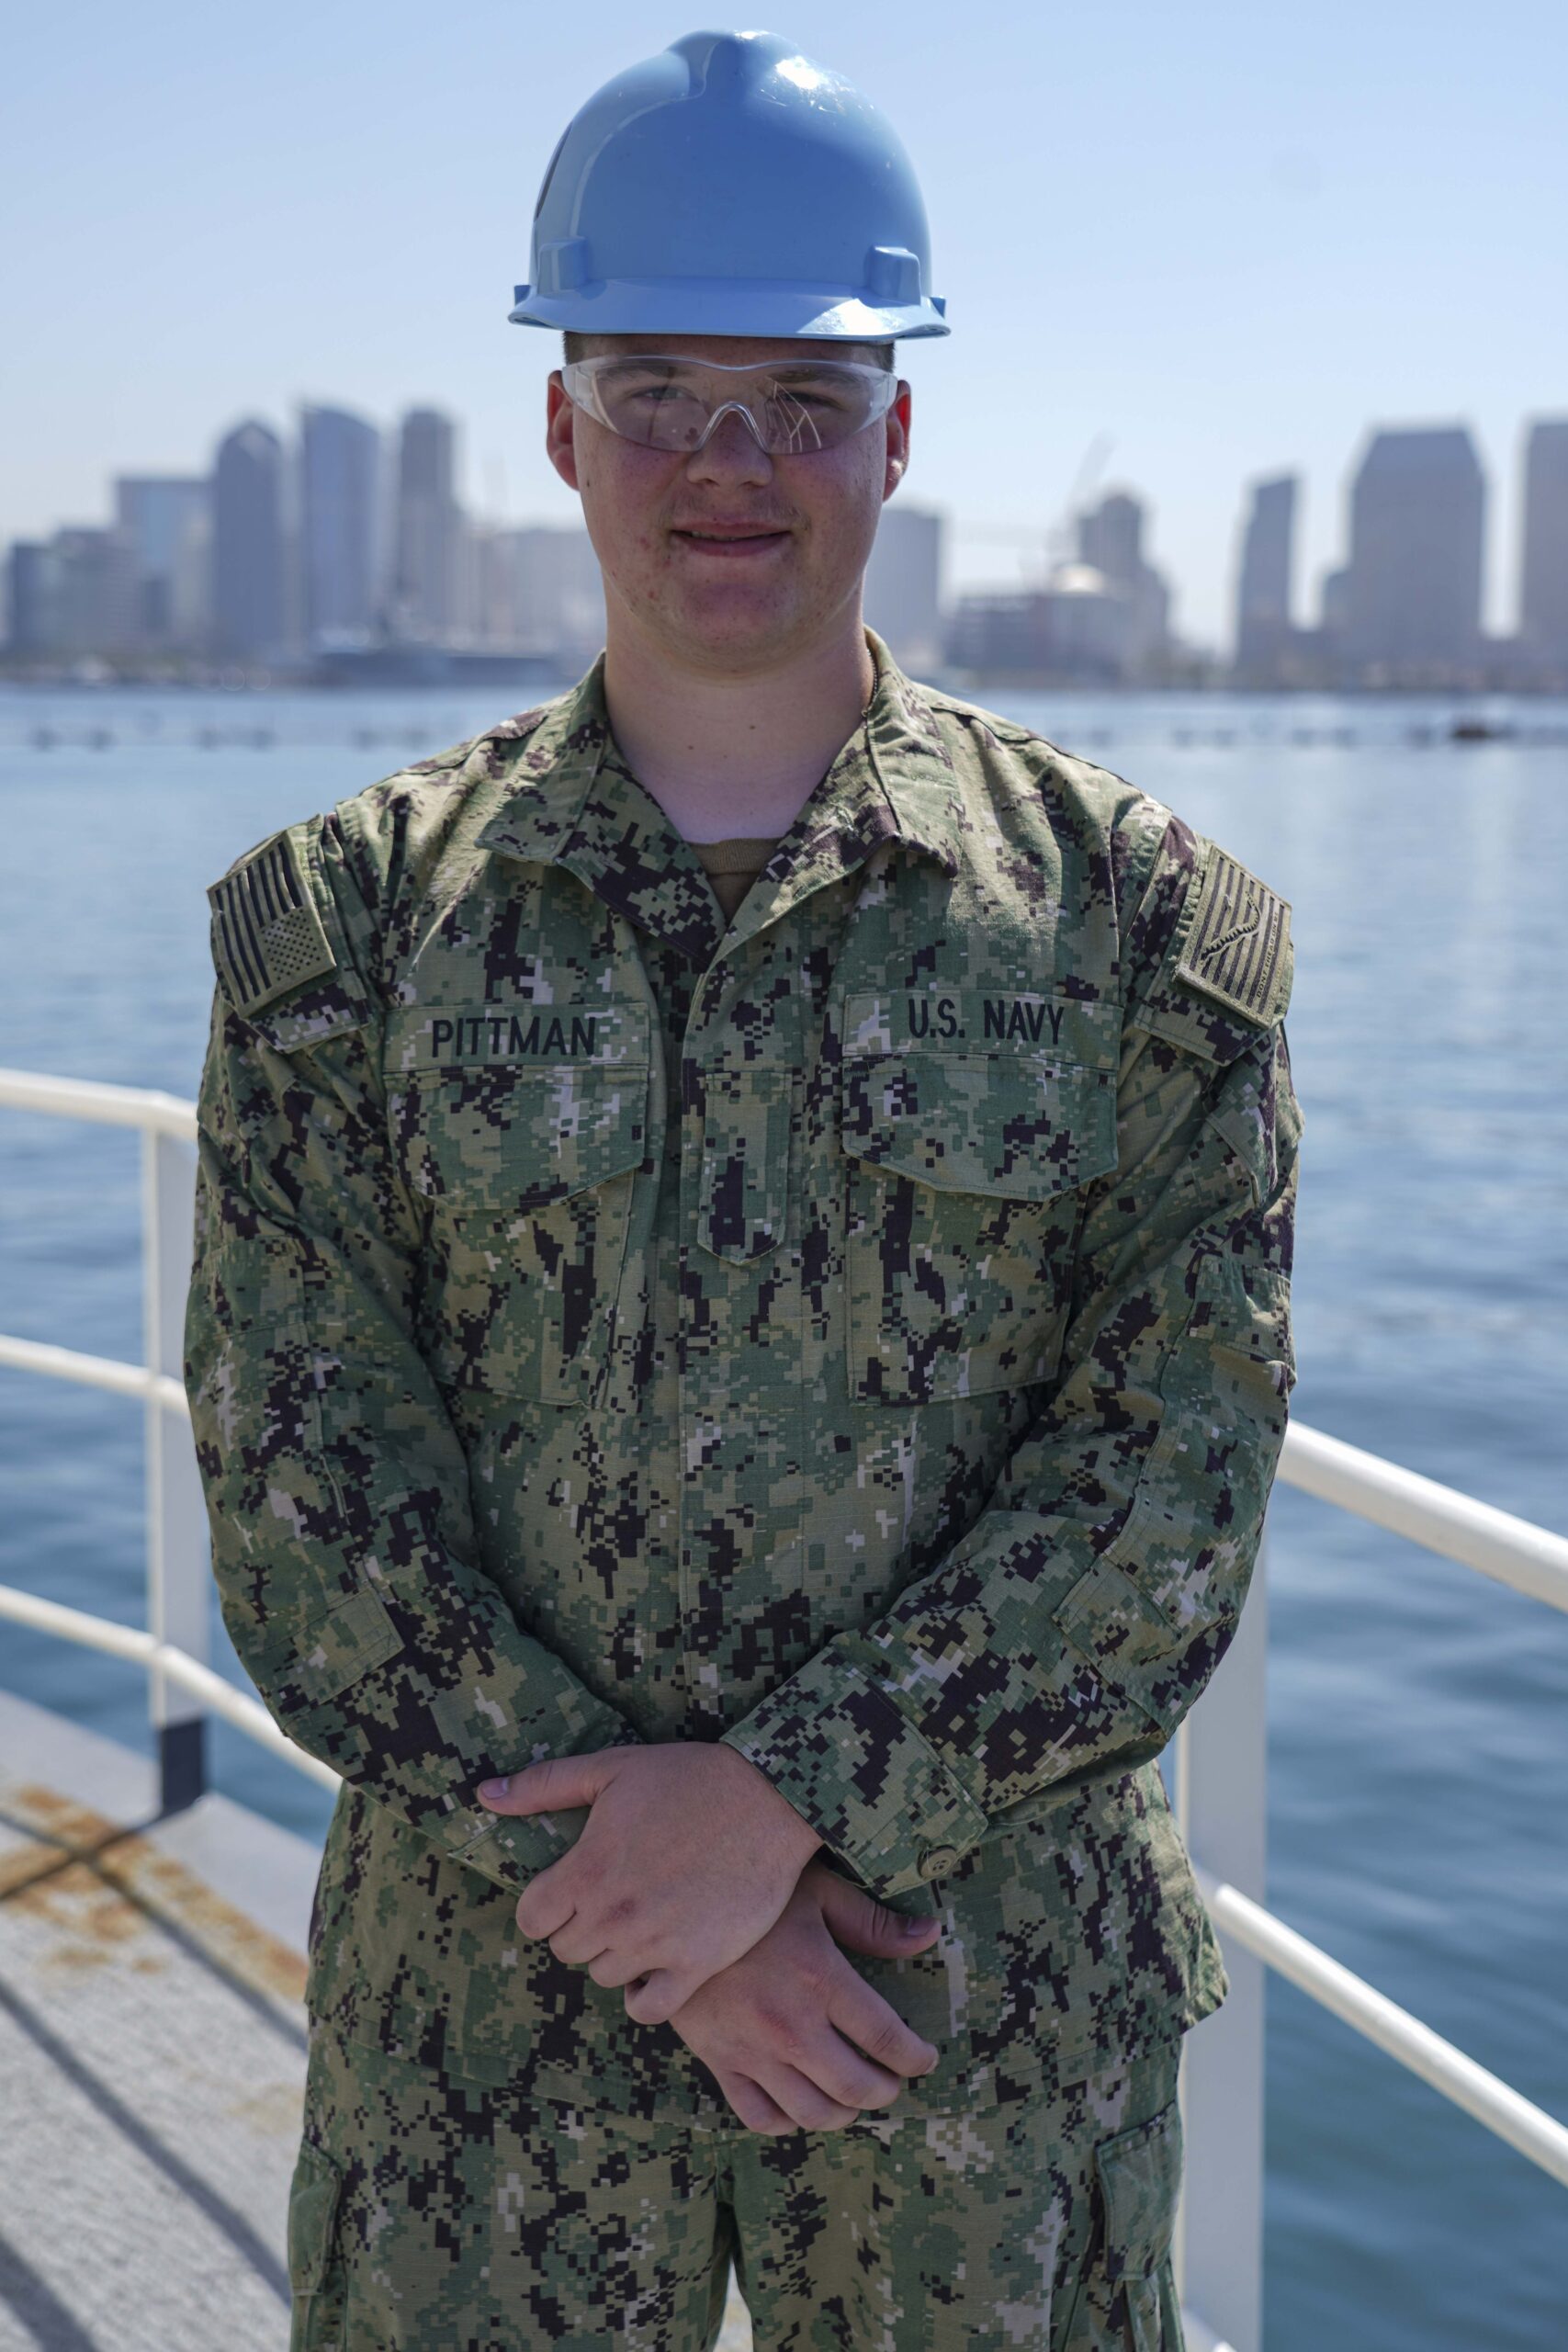 Rochester native serves aboard floating airport USS Carl Vinson